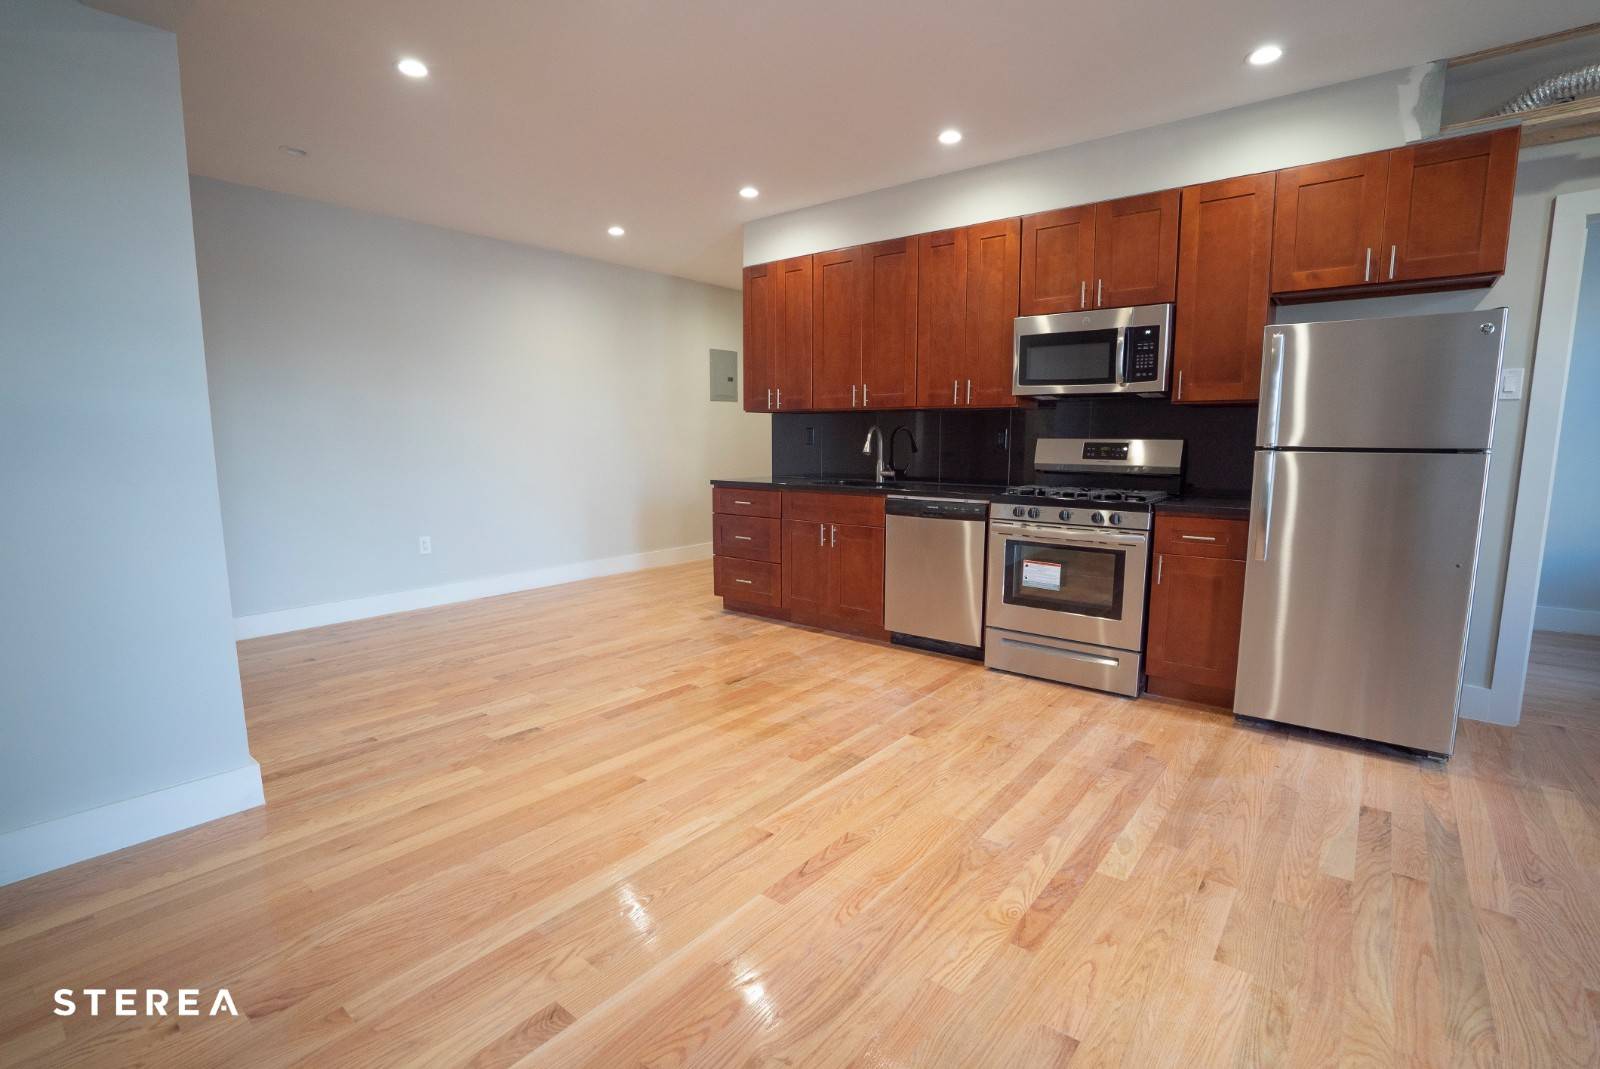 Rent this recently renovated 3 bedroom, 2 full bathroom apartment with all the amenities built in washer dryer in the apartment, dishwasher, built in microwave, beautiful finishes and in an ...